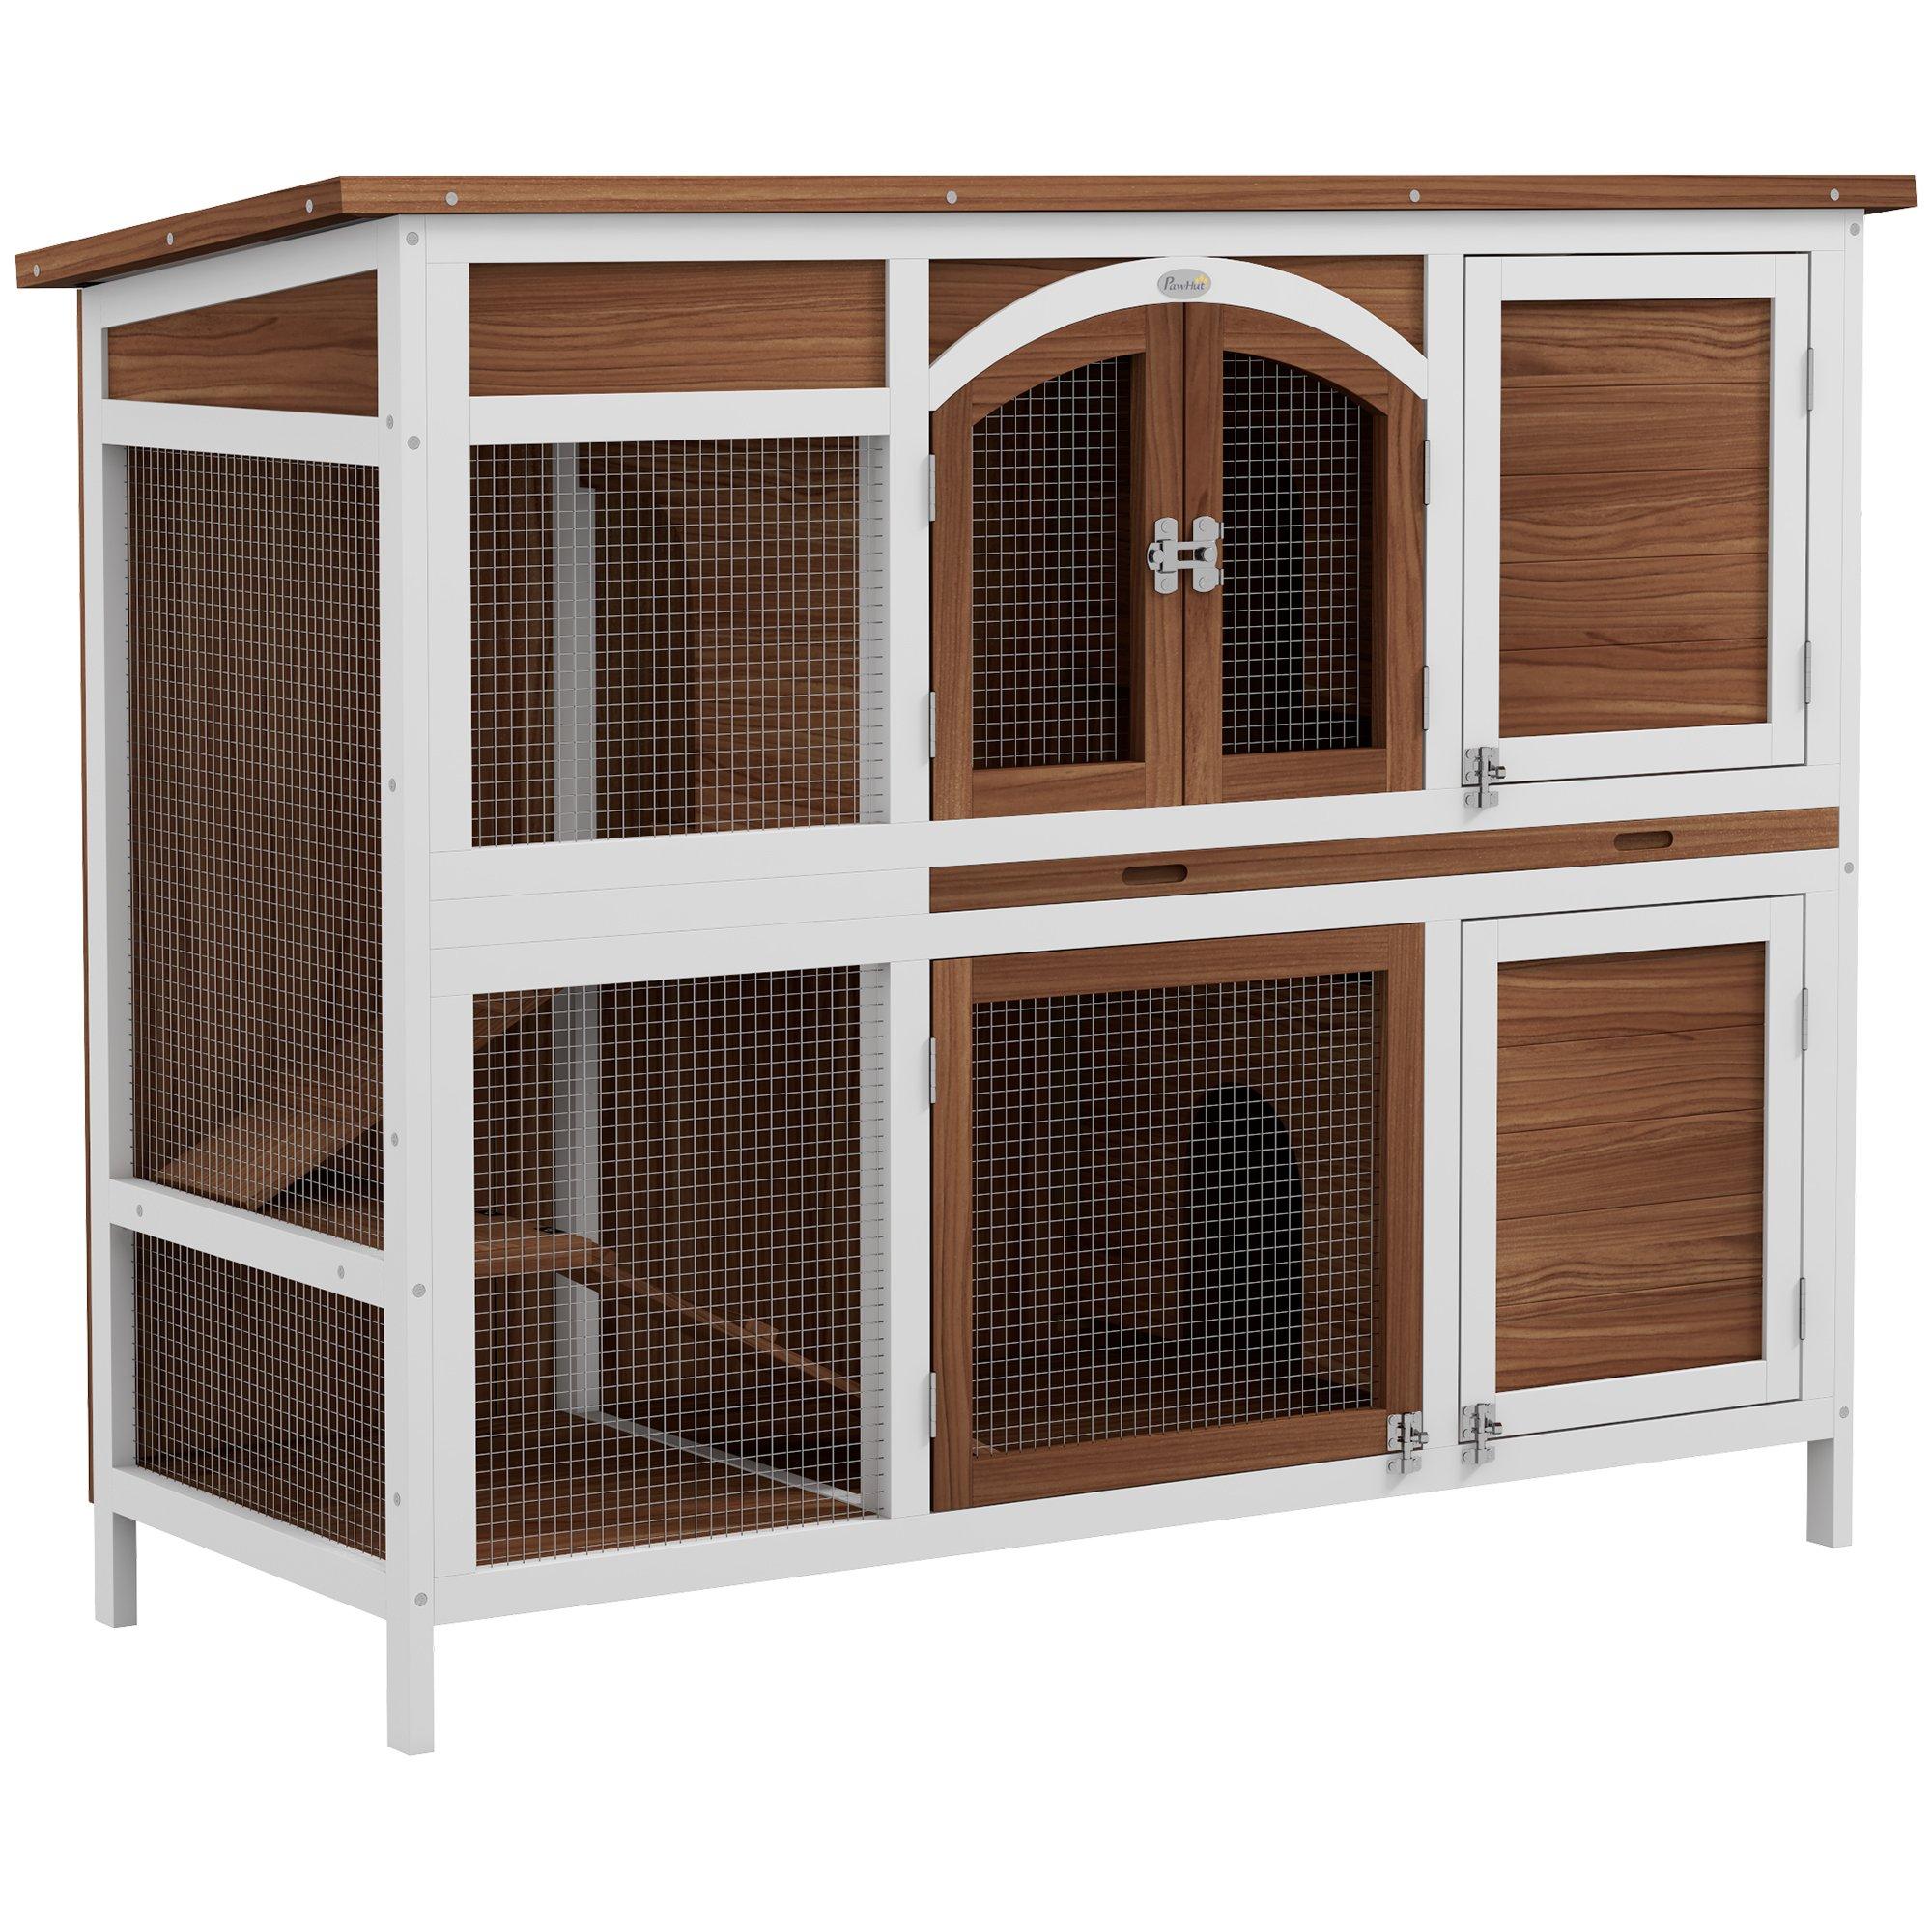 Two-Tier Wooden Rabbit Hutch Bunny Run with Openable Roof, Slide-Out Tray, Ramp